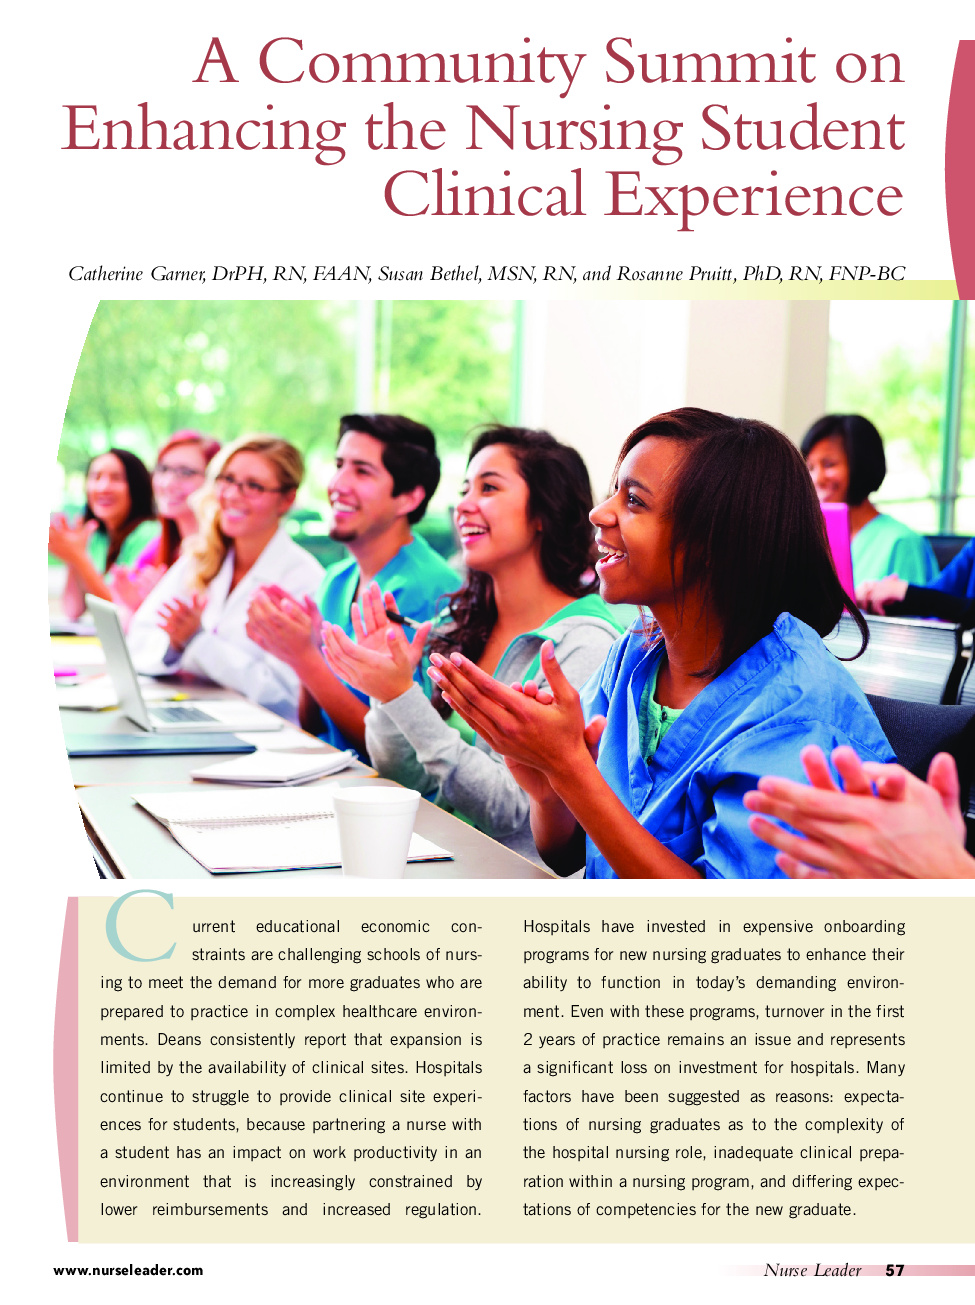 A Community Summit on Enhancing the Nursing Student Clinical Experience